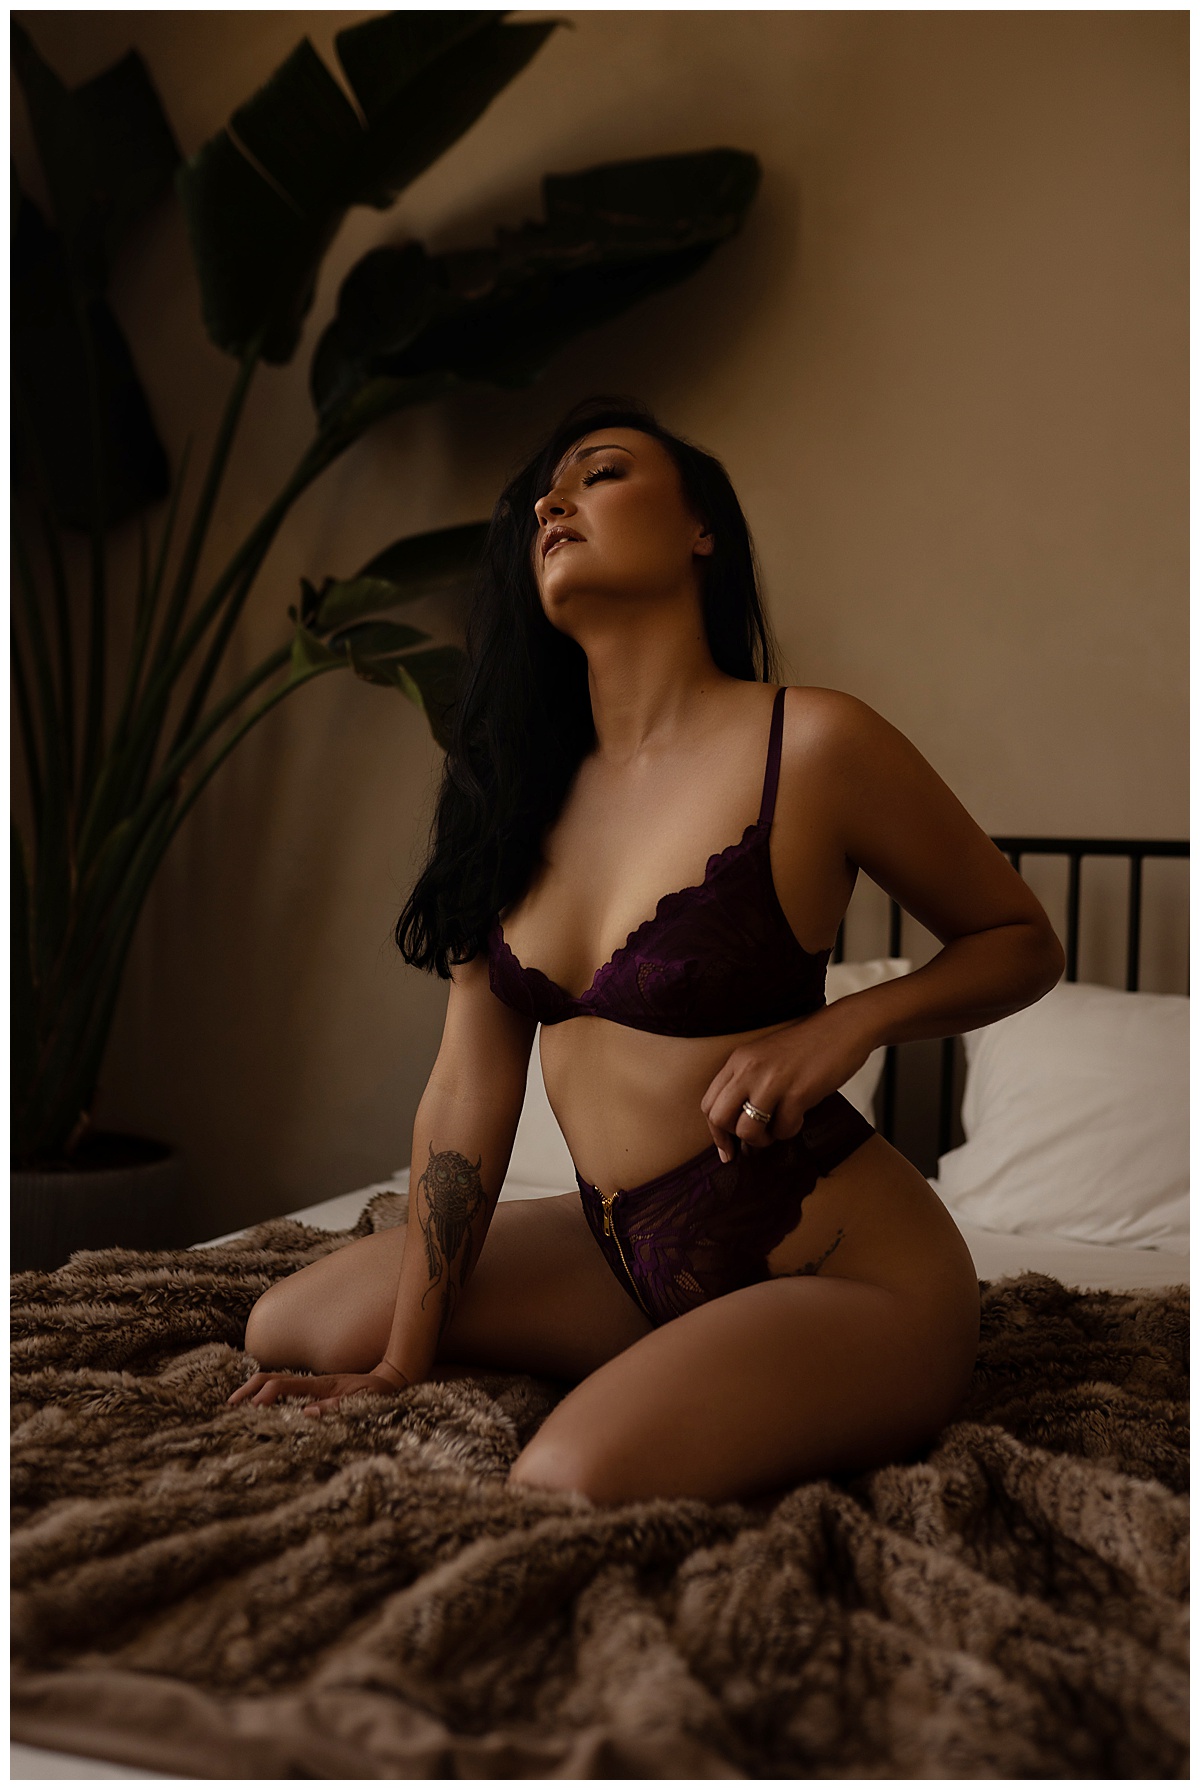 Adult kneels on bed tugging at lingerie for Sioux Falls Boudoir Photographer